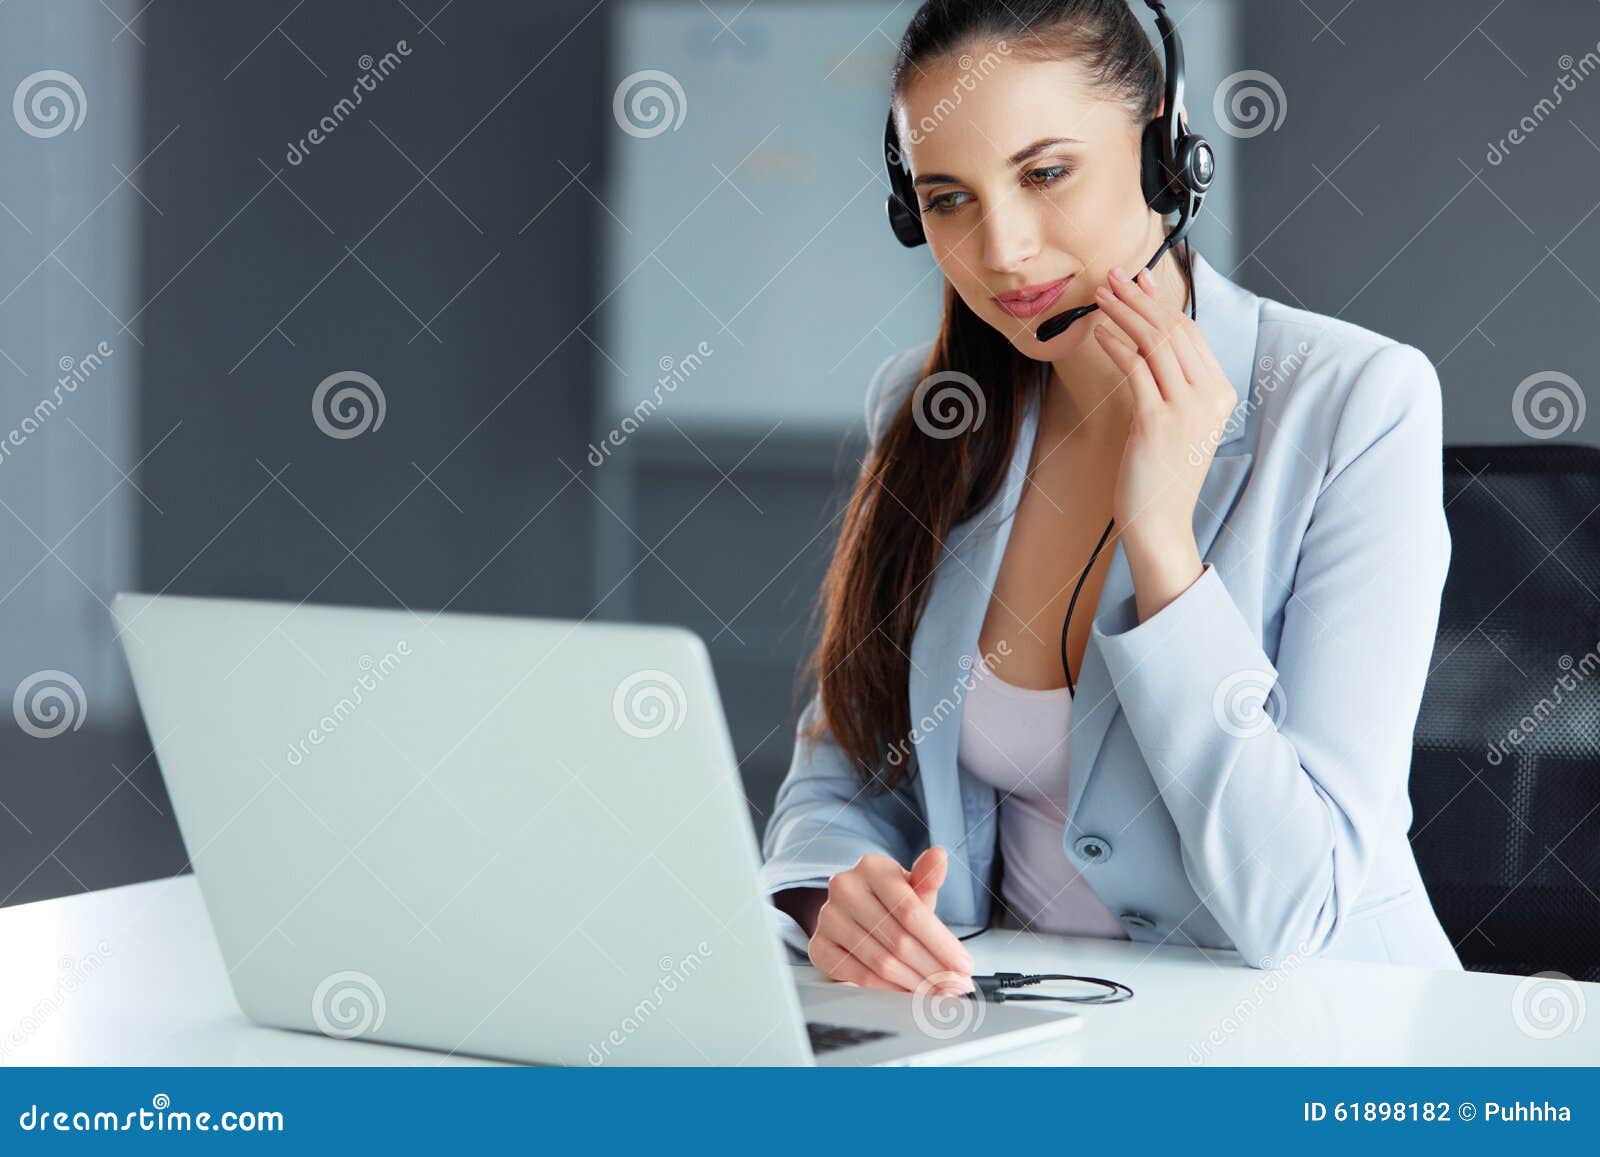 call center operator sitting infront of her computer